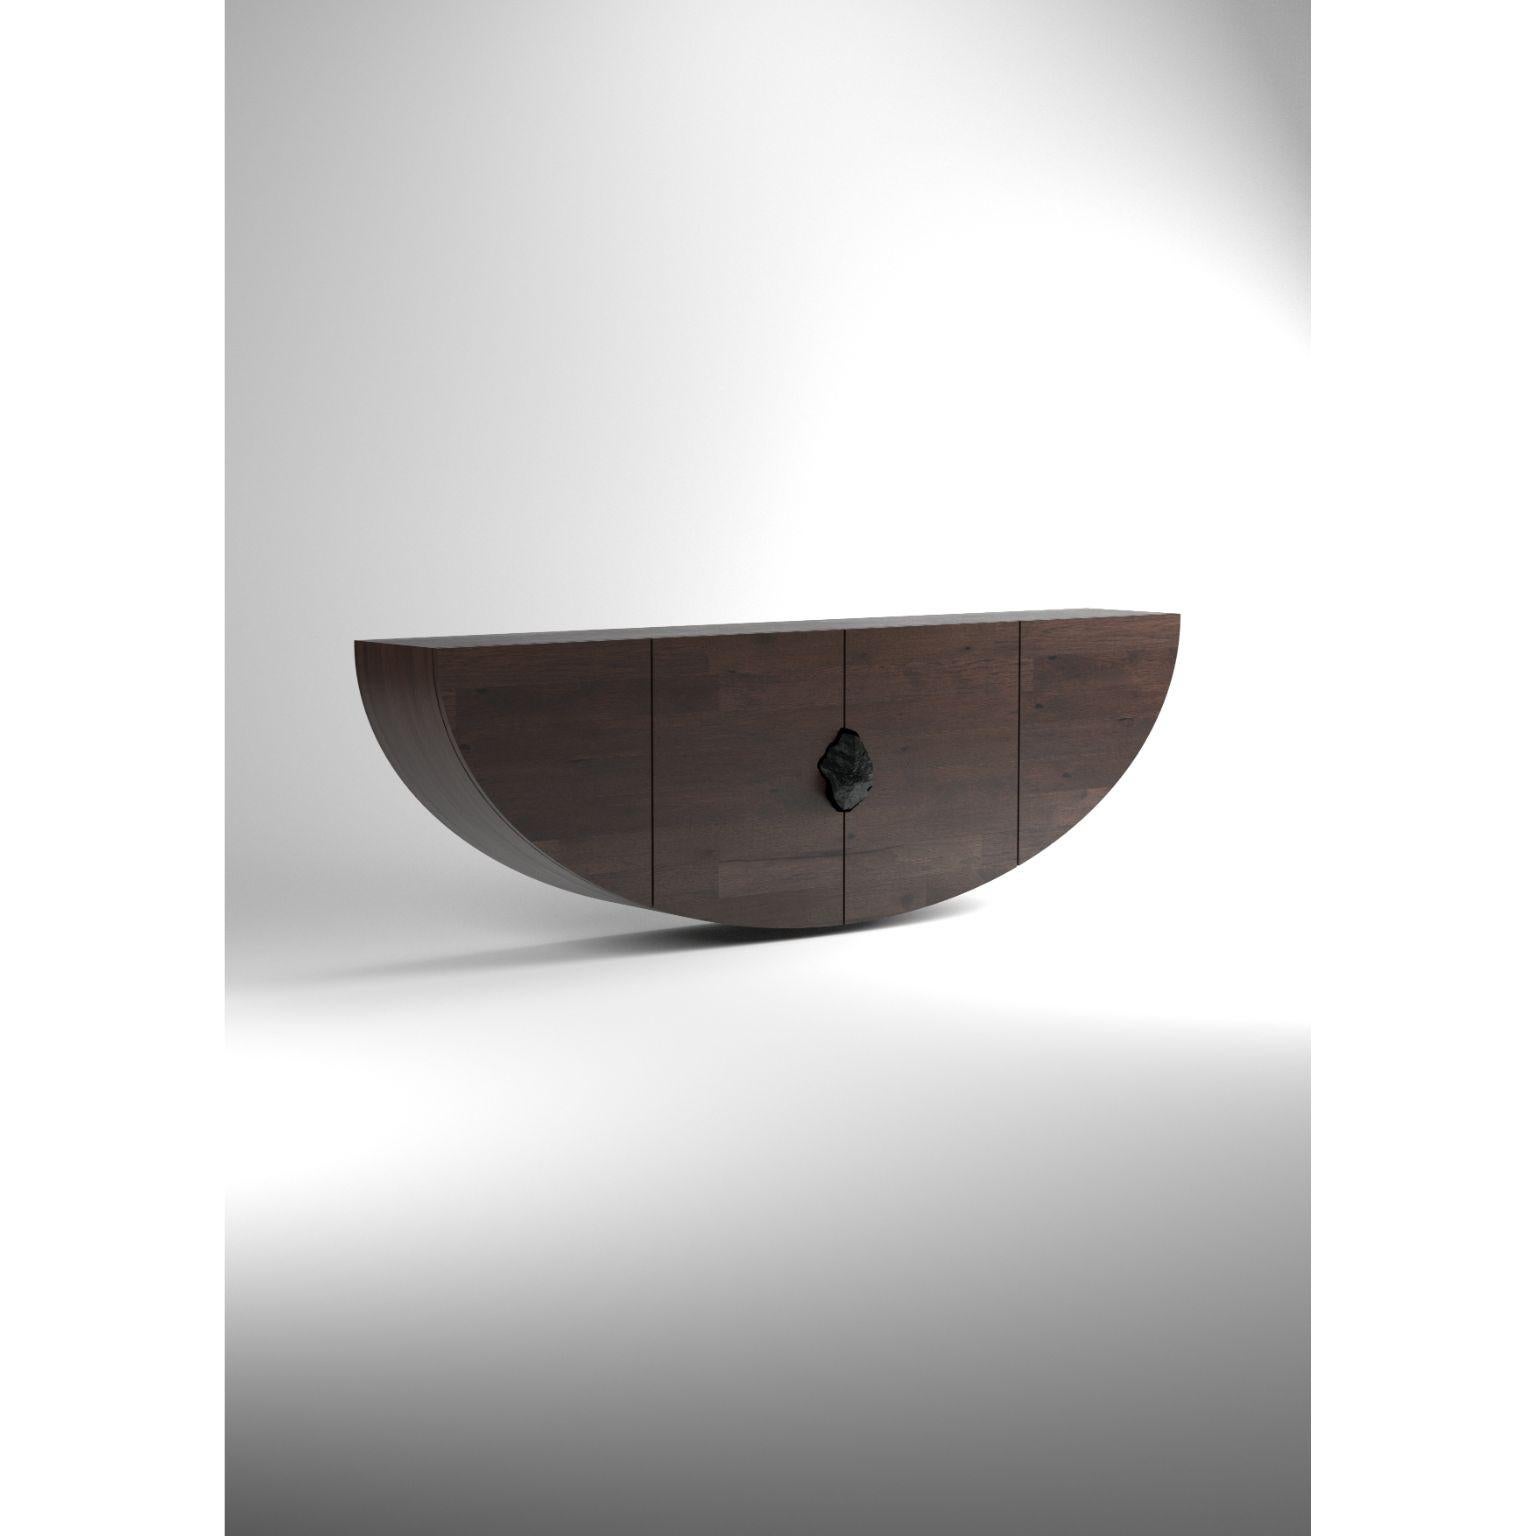 Bow console with Noir Belge (Standing or hanging) by Pierre De Valck.
Dimensions: W 190 x D 30 x H 63 cm.
Materials: Wood veneer with Noir Belge.
Weight: 75 kg.
Each piece is unique.

Pierre De Valck (1991) born in Brussels, is a Ghent-based